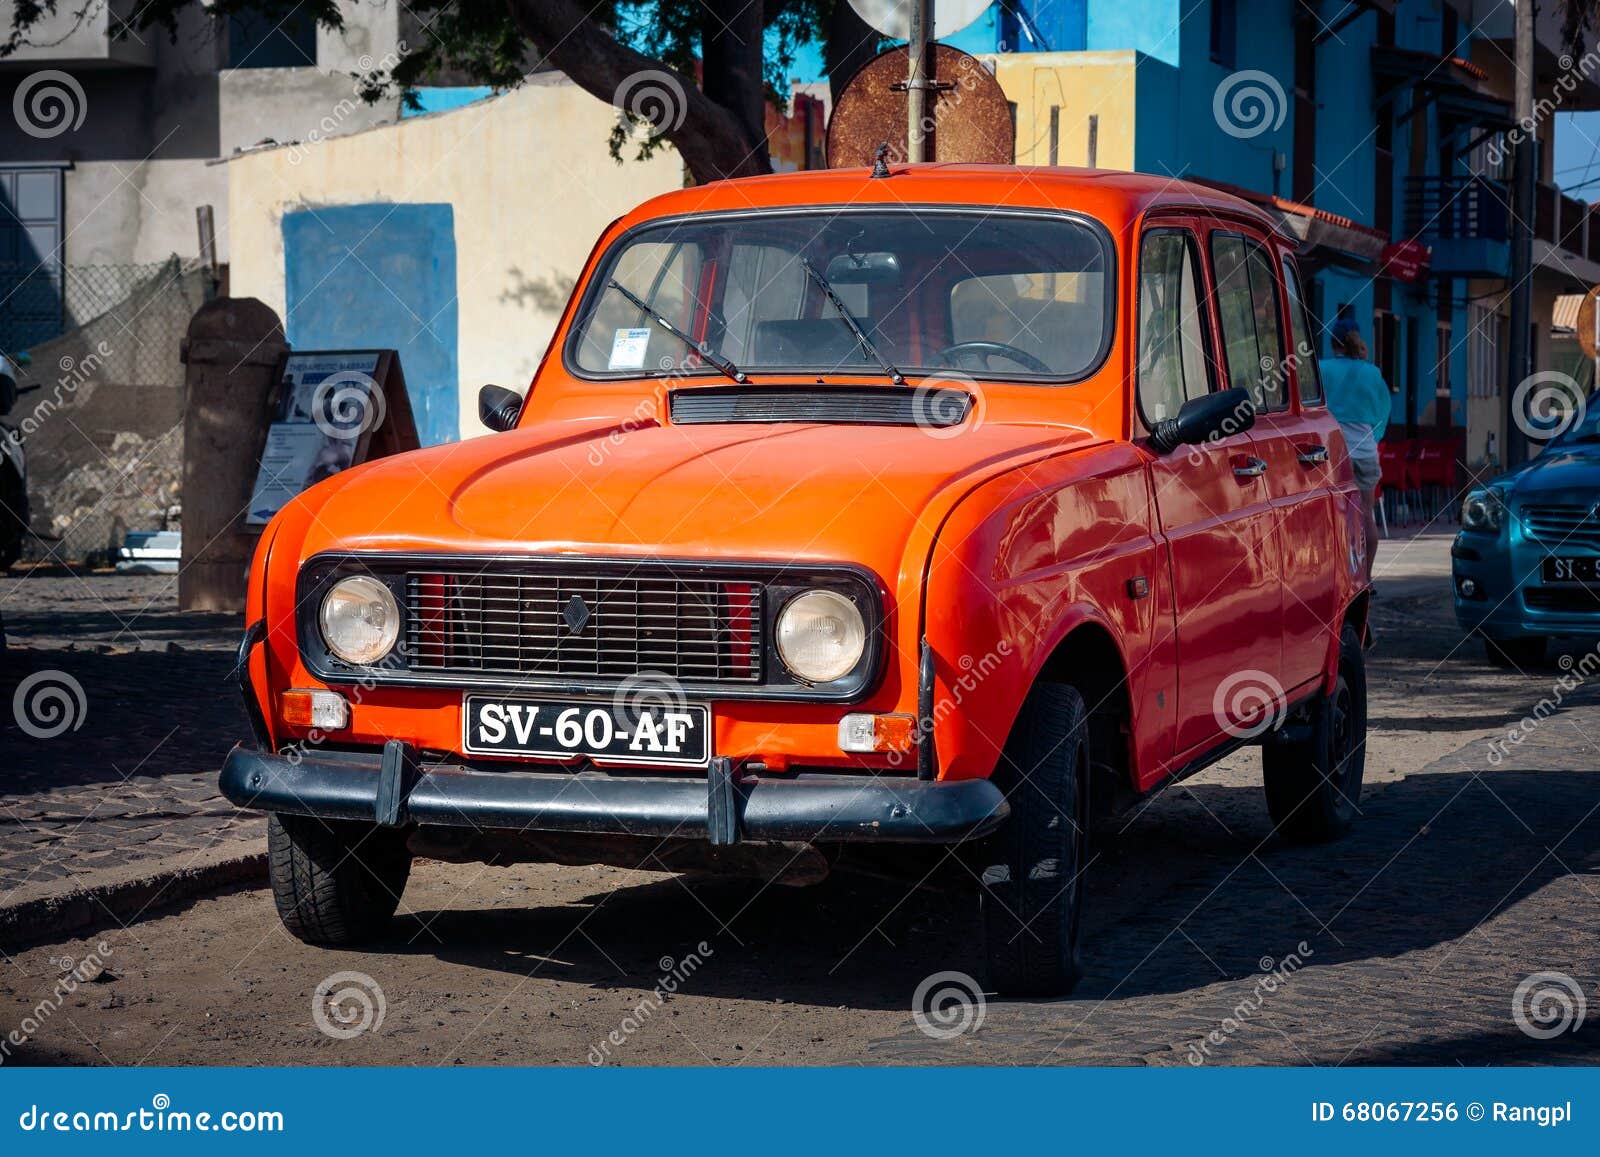 60 years of the Renault 4